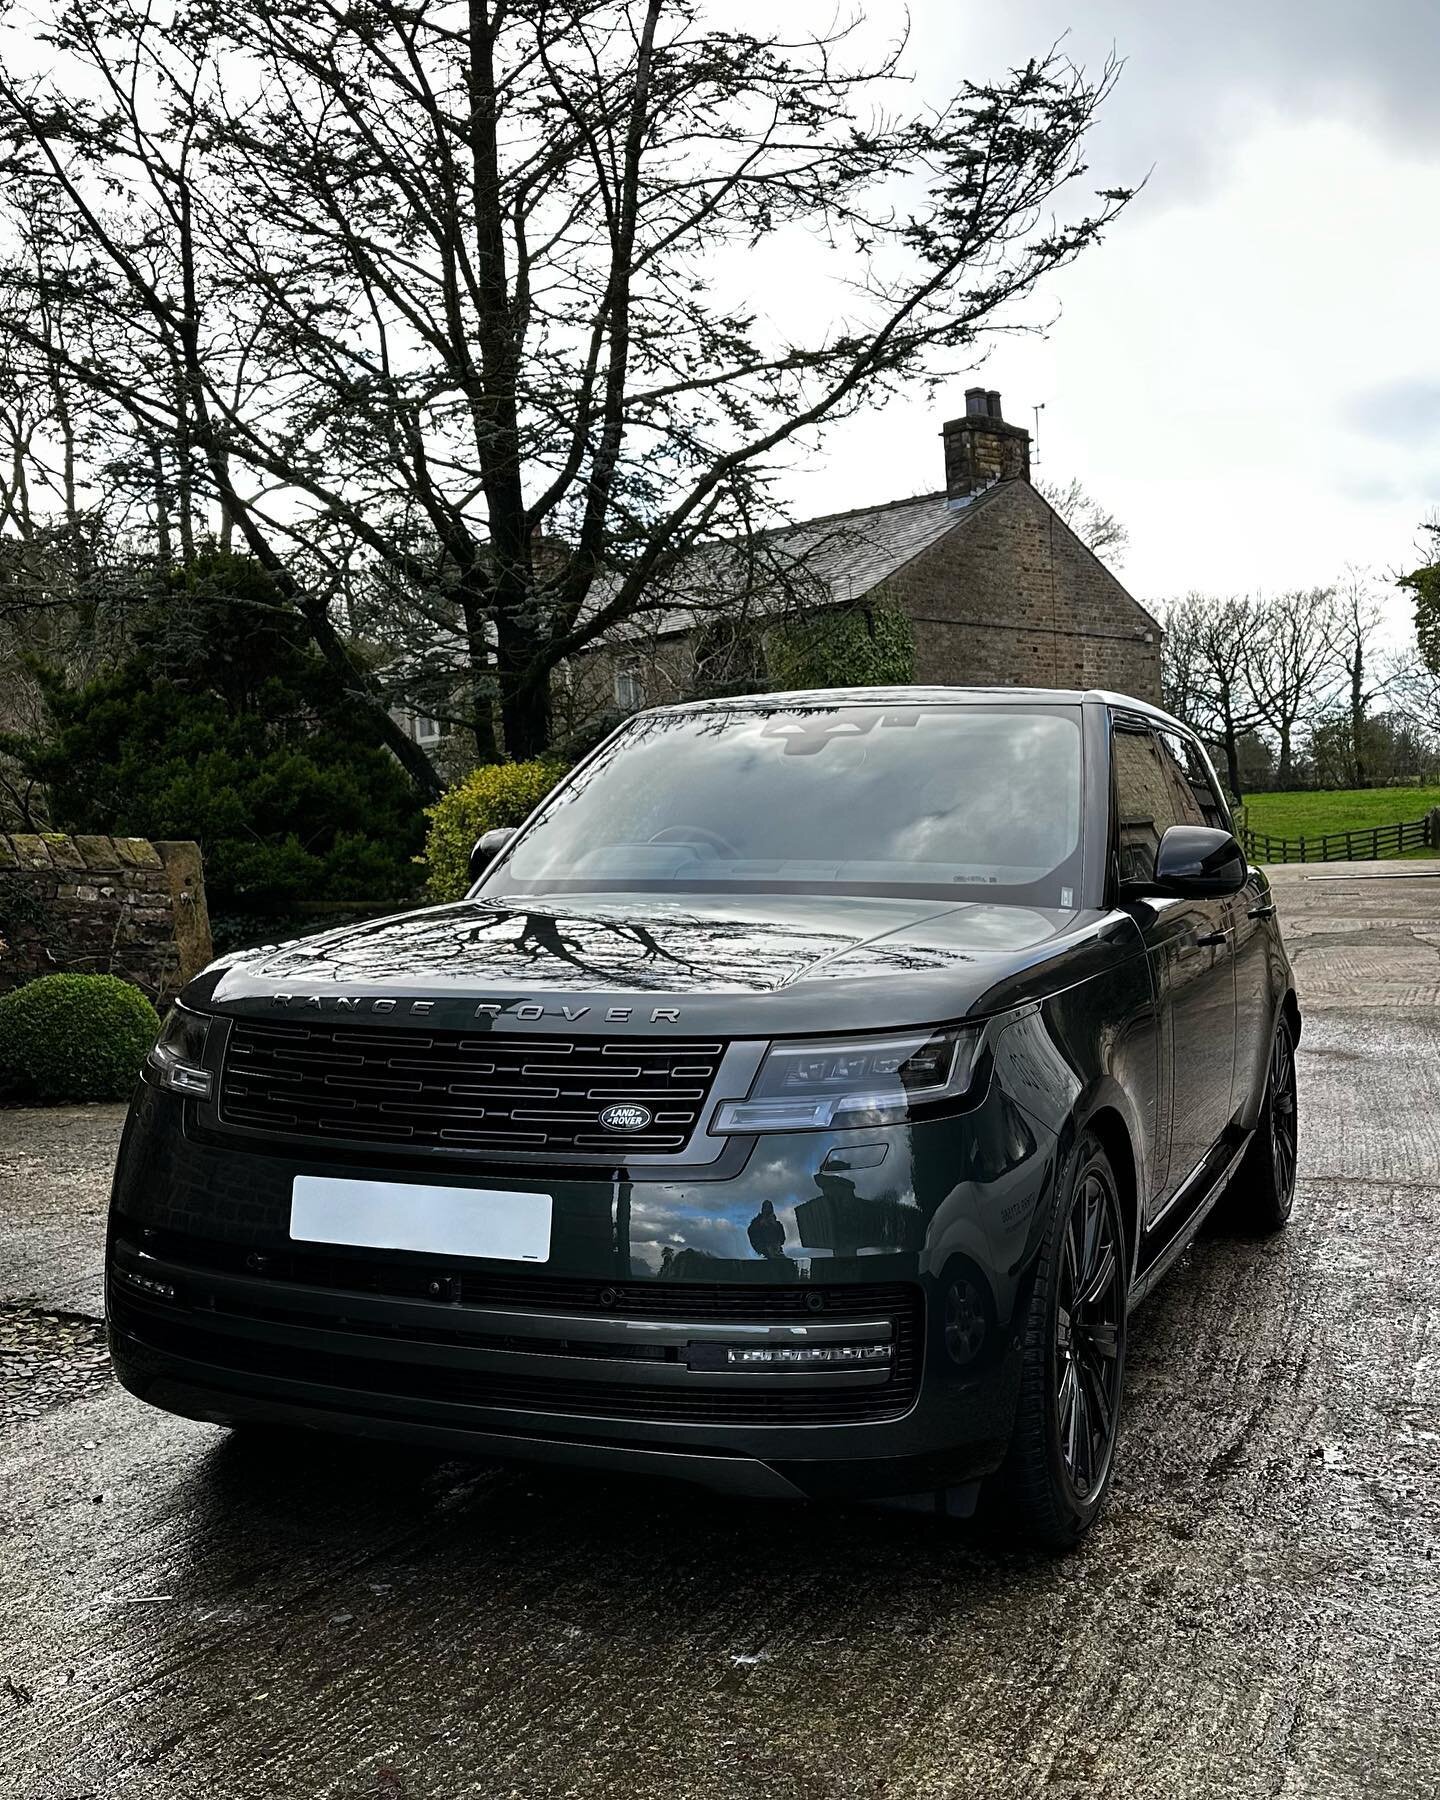 The king of all wafters back looking fresh! 

Get in touch to see what we can do for you!

☎ 07999 571586
💻 www.thecarcleaningco.com
📧 info@thecarcleaningco.com 

#thecarcleaningco #rangerover #rangerovervogue #detailingworld #detailing #mobilevale